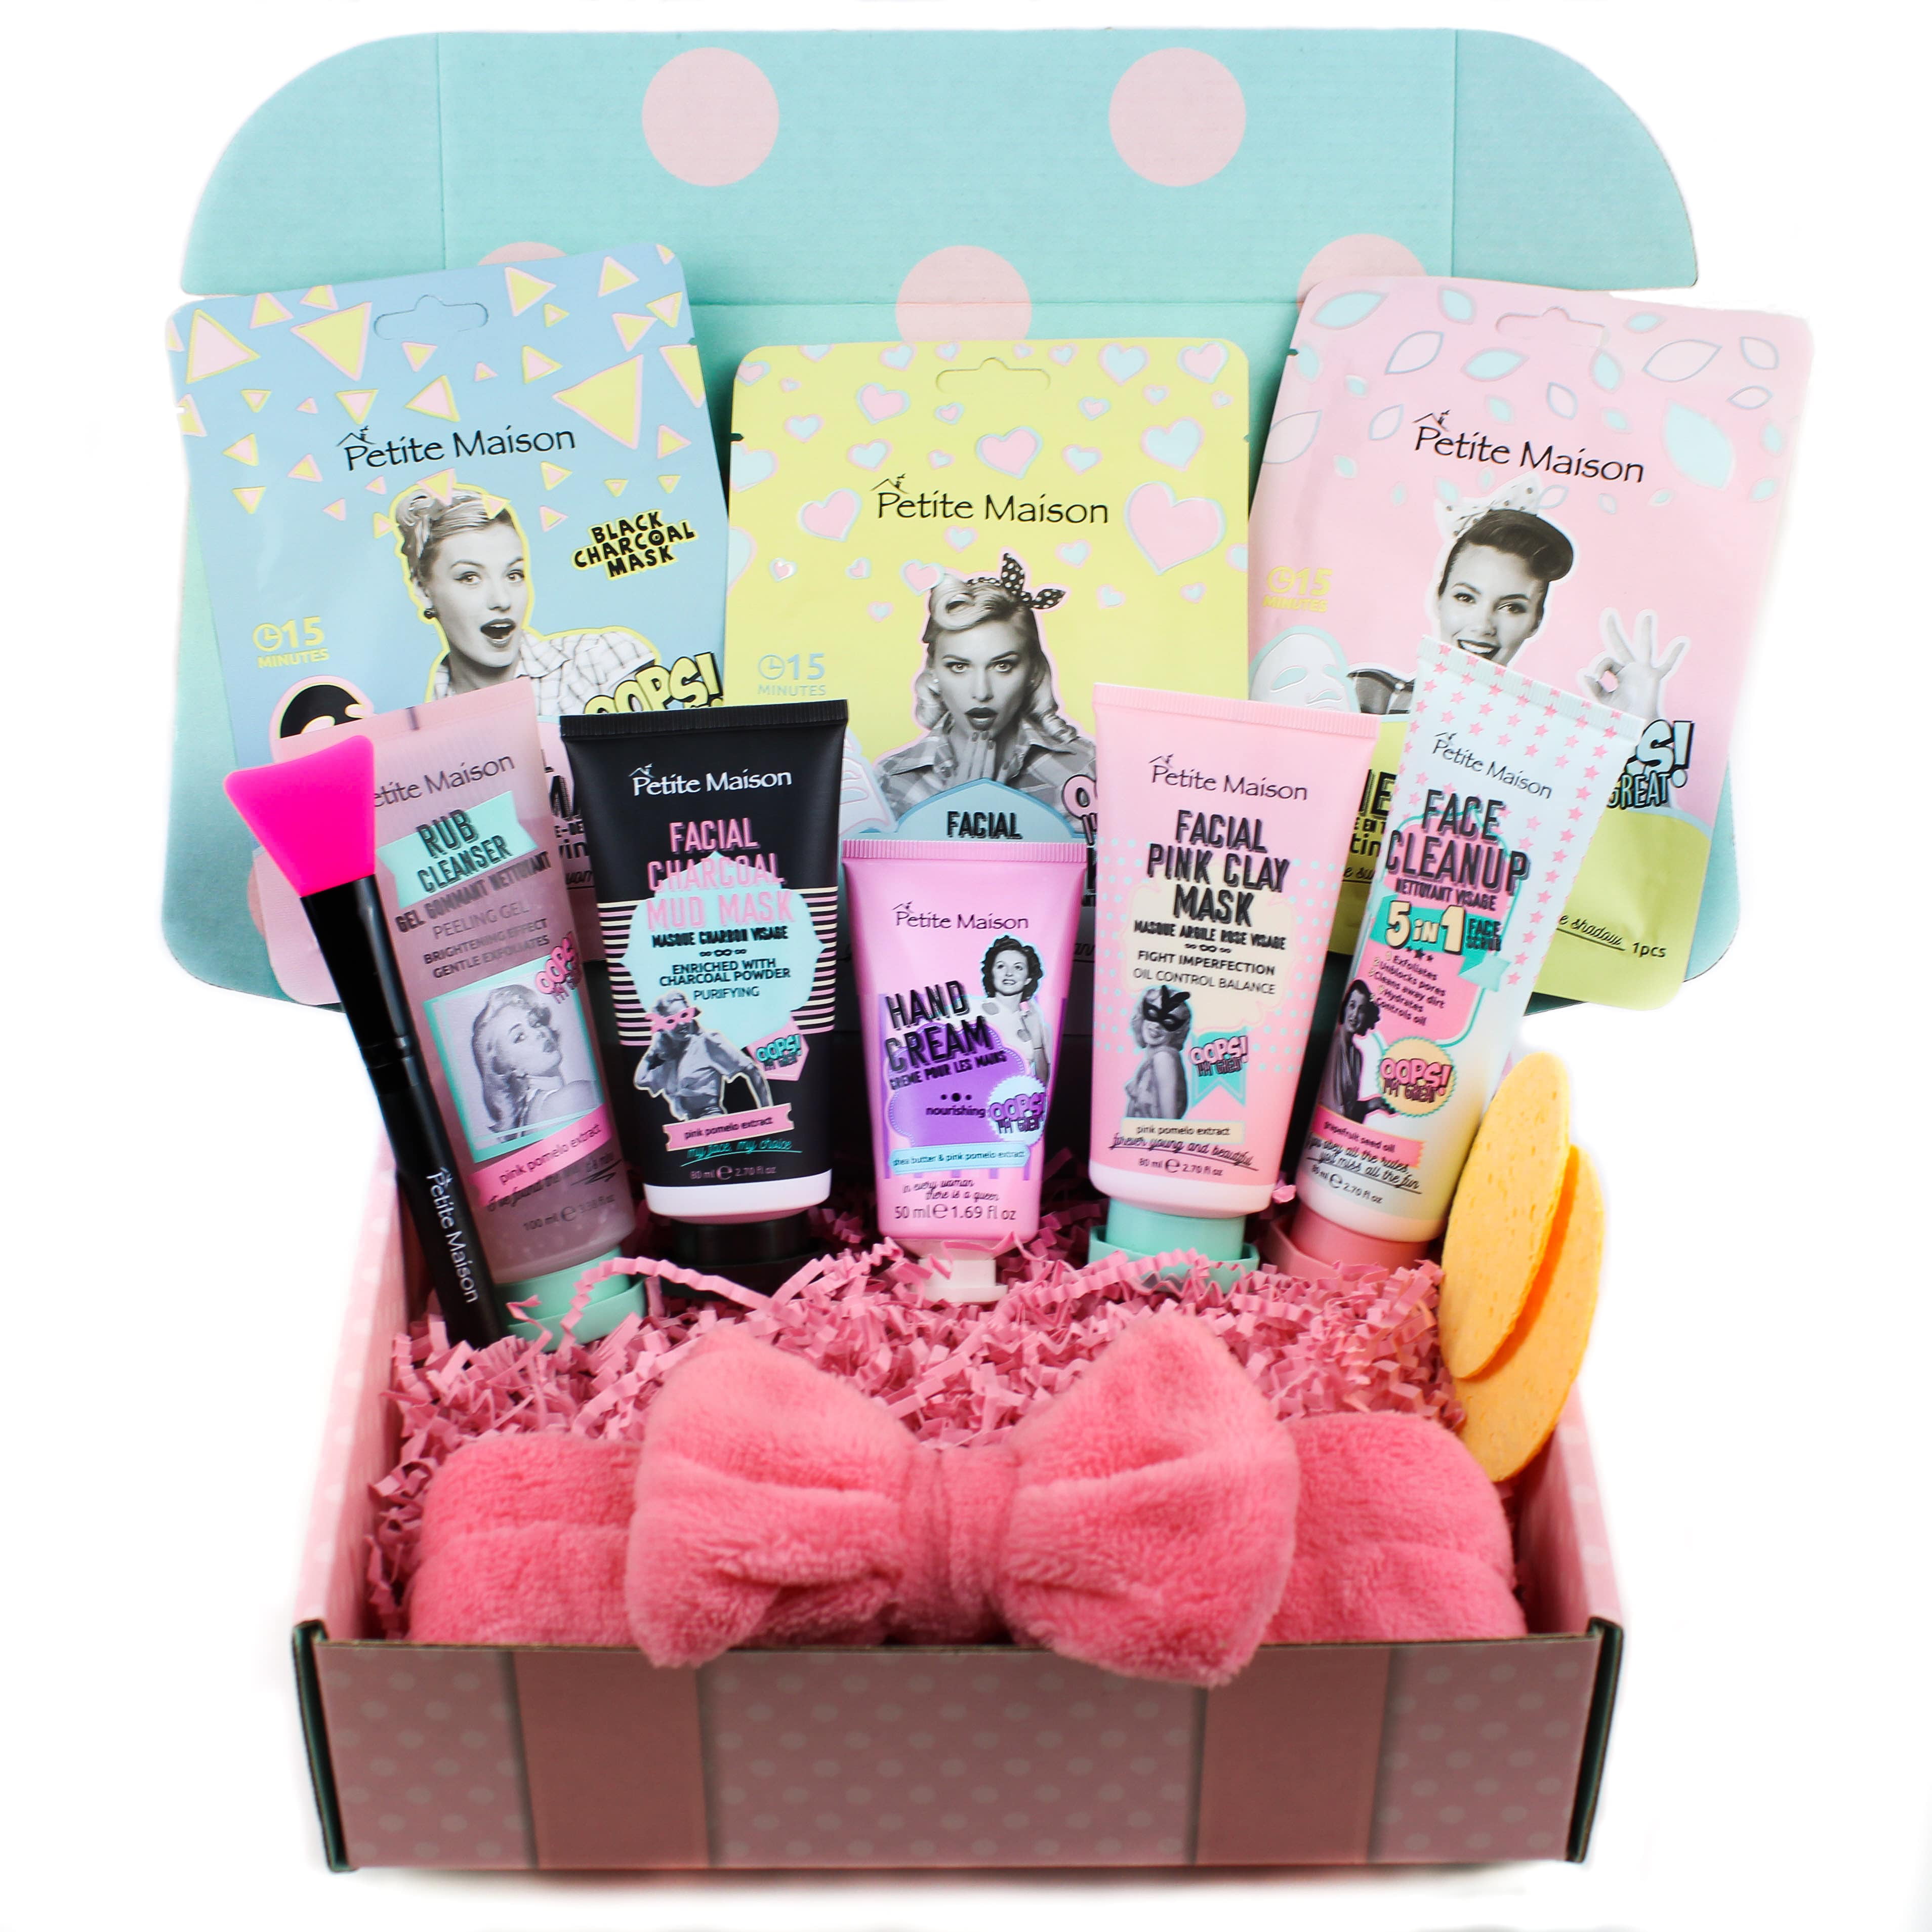  40th Birthday Gifts for Women, 40 and Fabulous Gift Basket for  mom, Friend, Sister, Wife, Aunt, 40th Birthday For Women